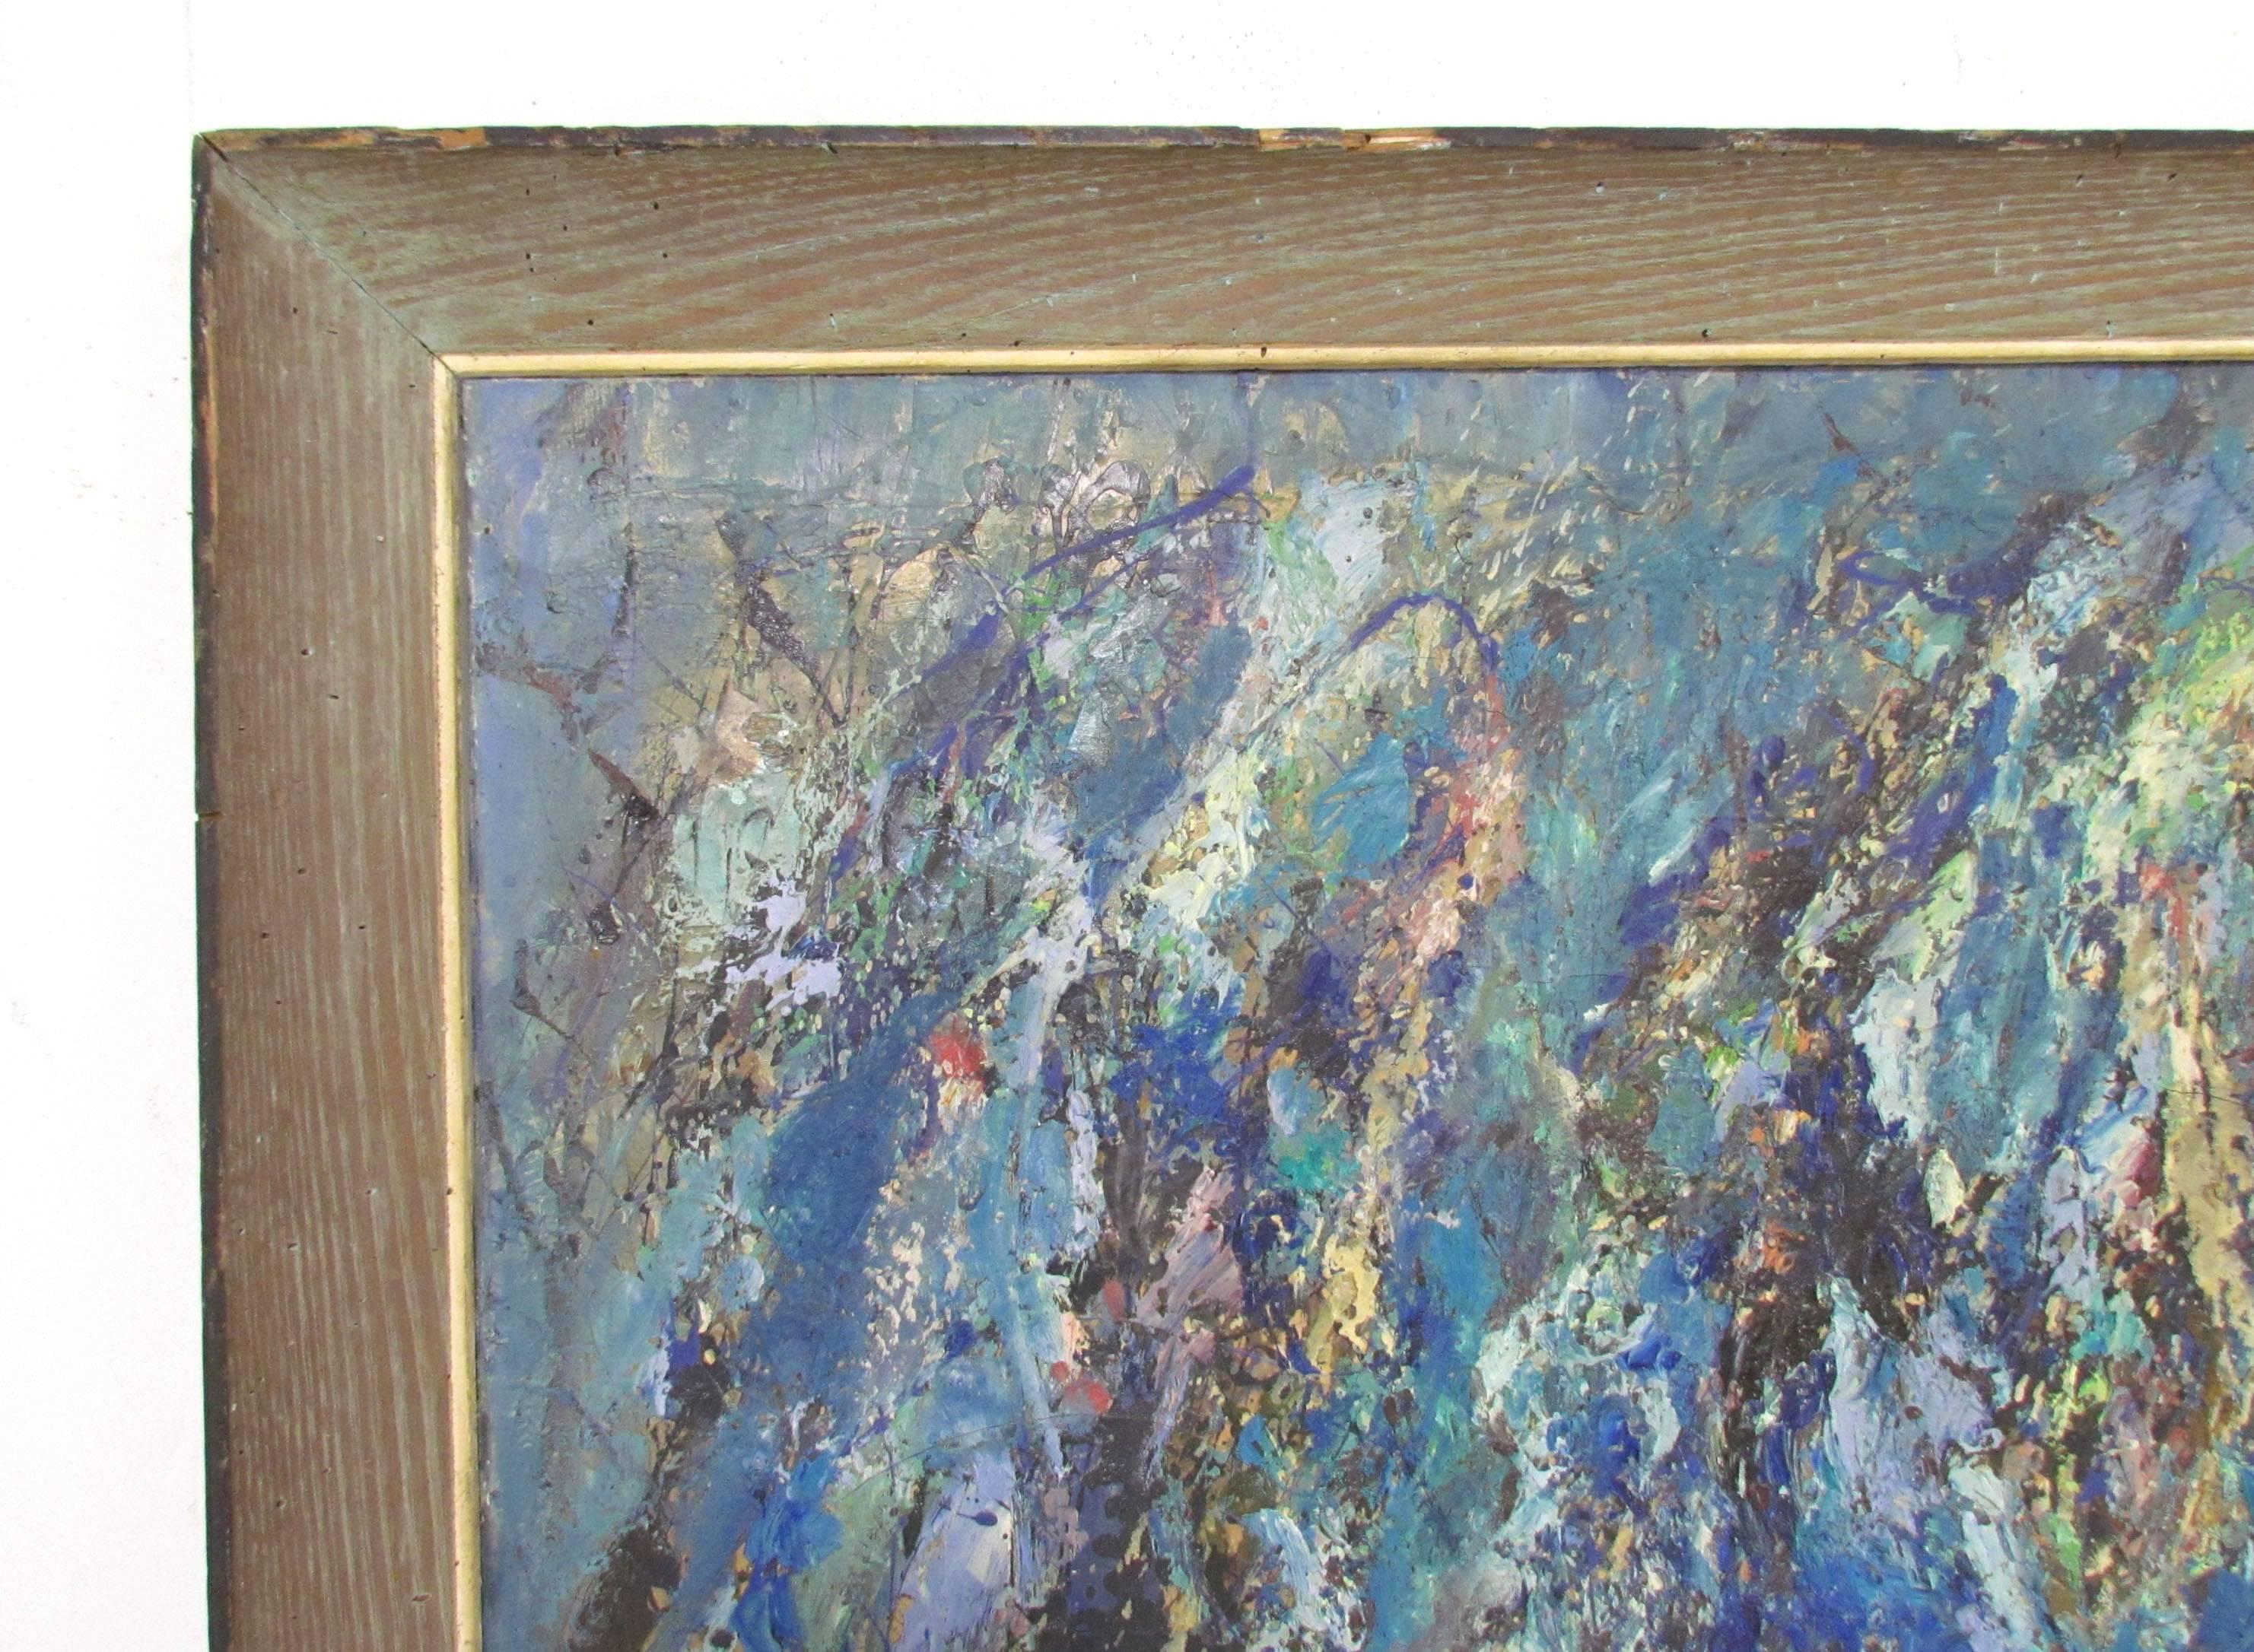 Abstract expressionist oil on canvas by Virginia Mortenson Francis dated 1961, titled on reverse 